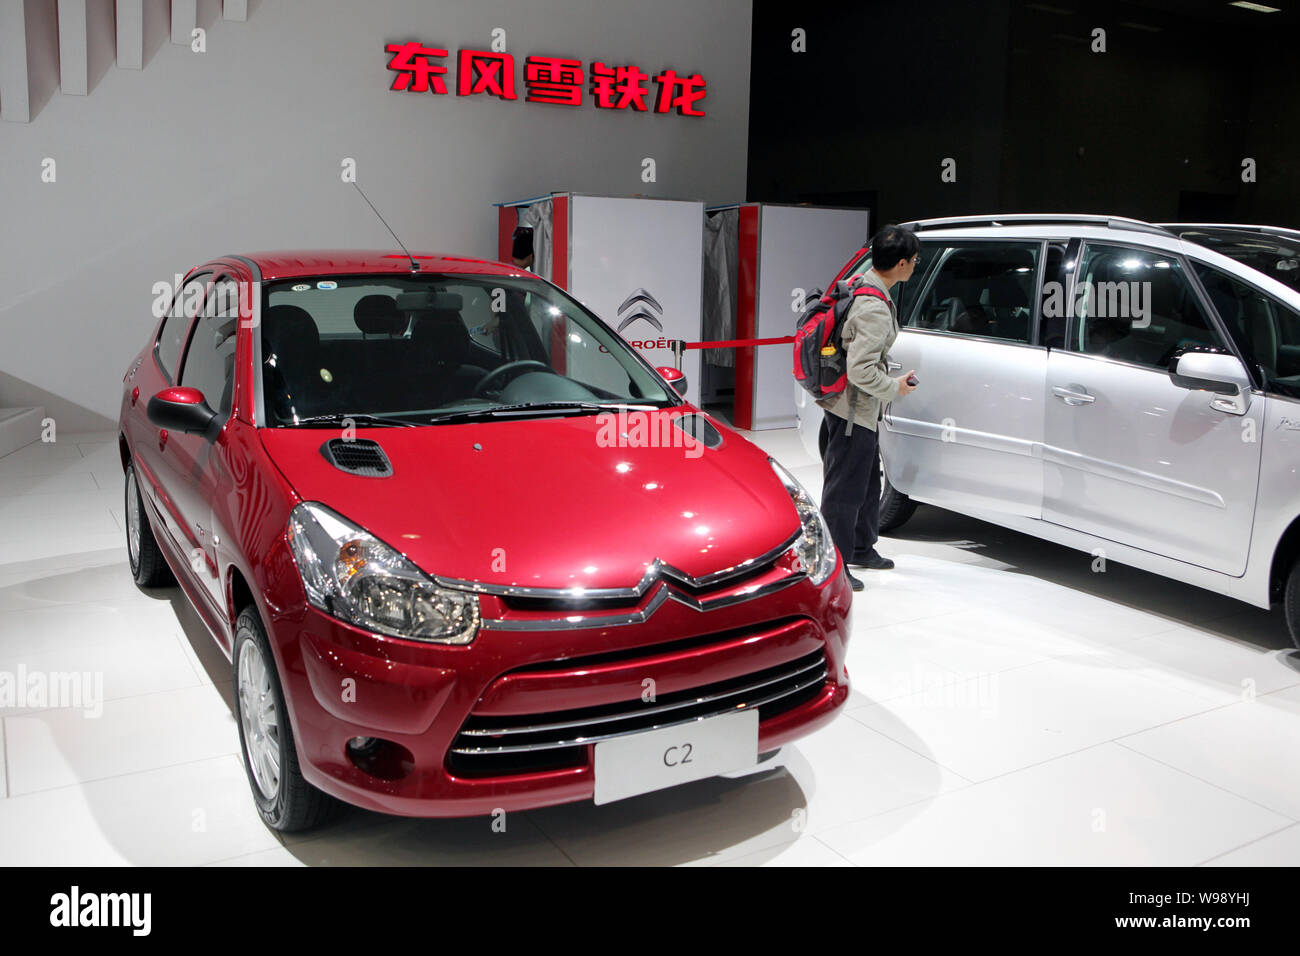 --File-- A Dongfeng Citroen C2 is seen on display during the 8th China (Guangzhou) International Automobile Exhibition, known as Auto Guangzhou 2010, Stock Photo